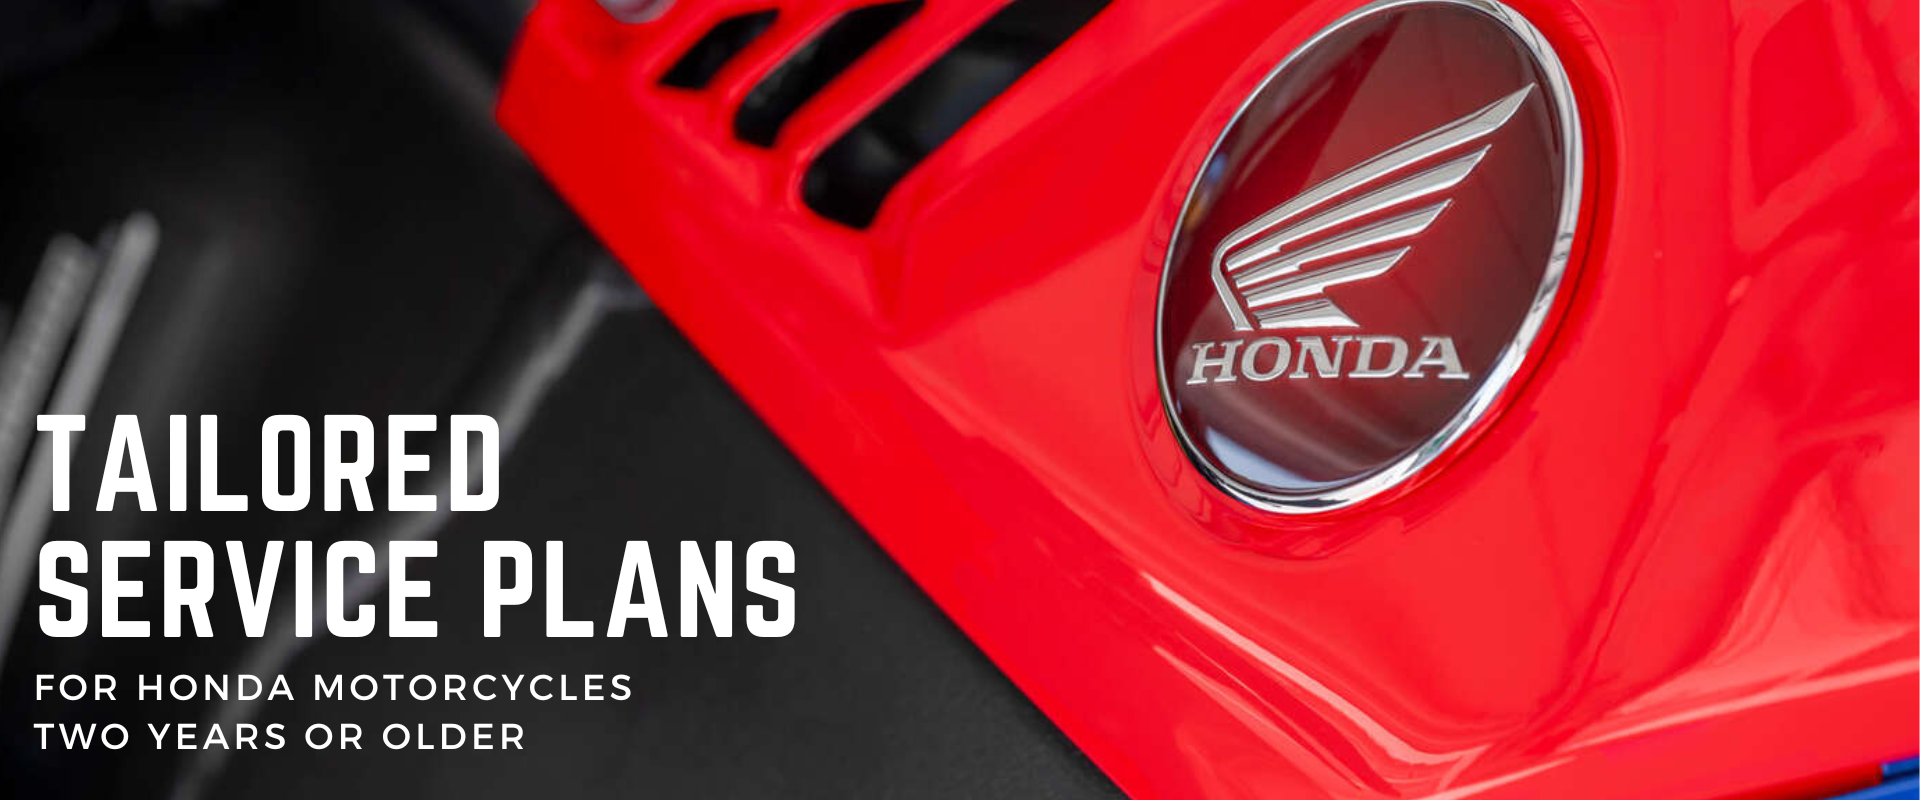 Honda Tailored Service Plans For Motorcycles